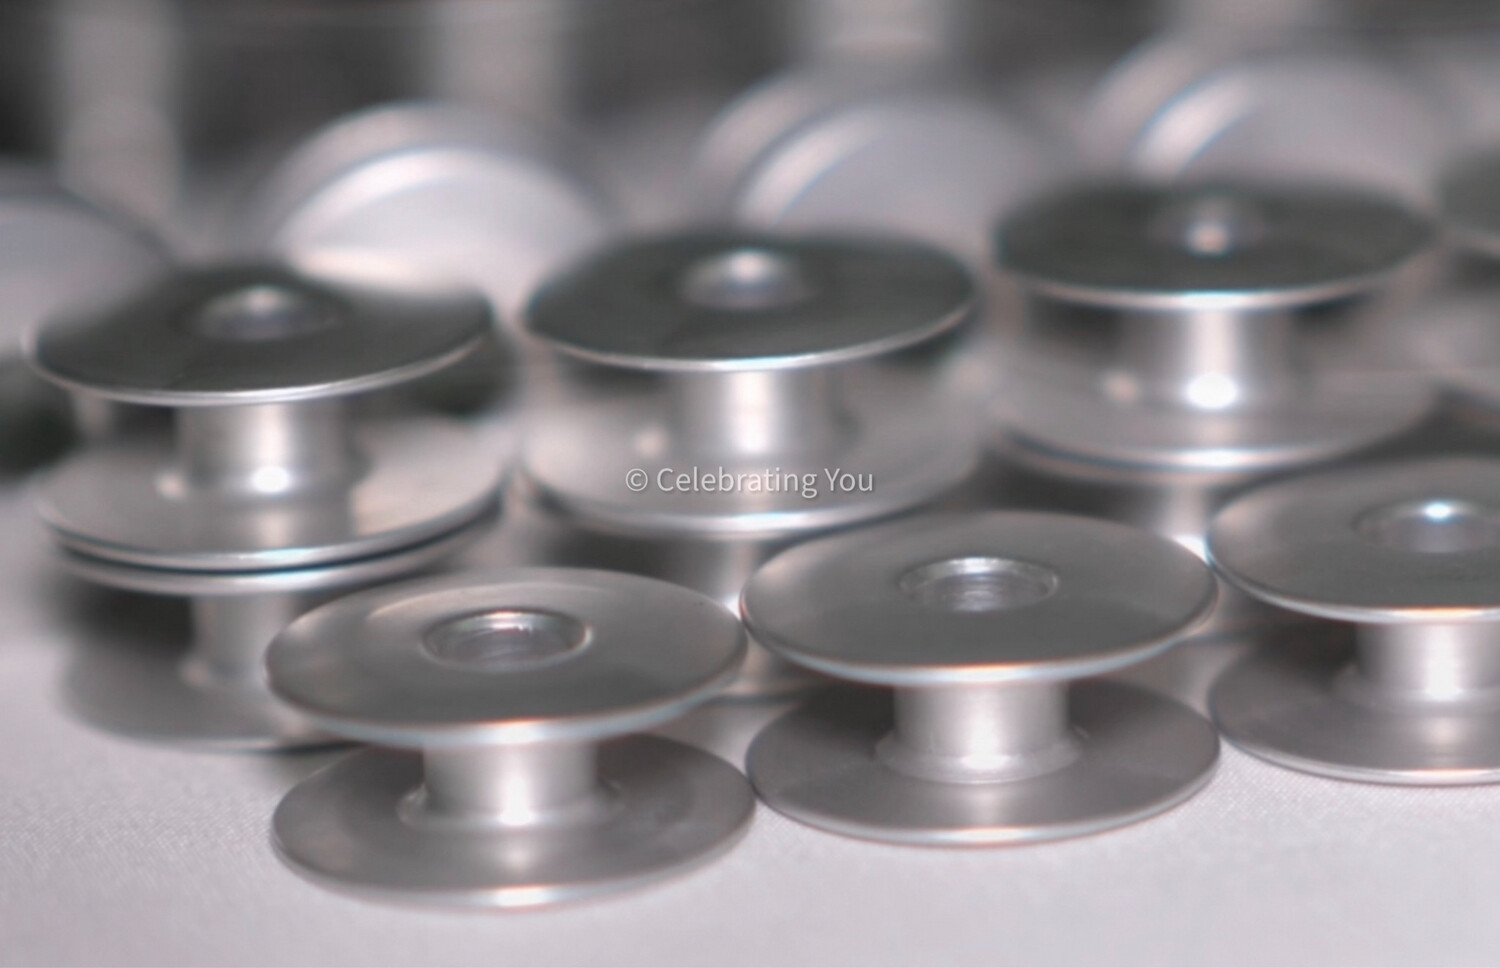 5 x Aluminum Bobbins for Commercial, Industrial, Computerized Embroidery and Sewing Machines